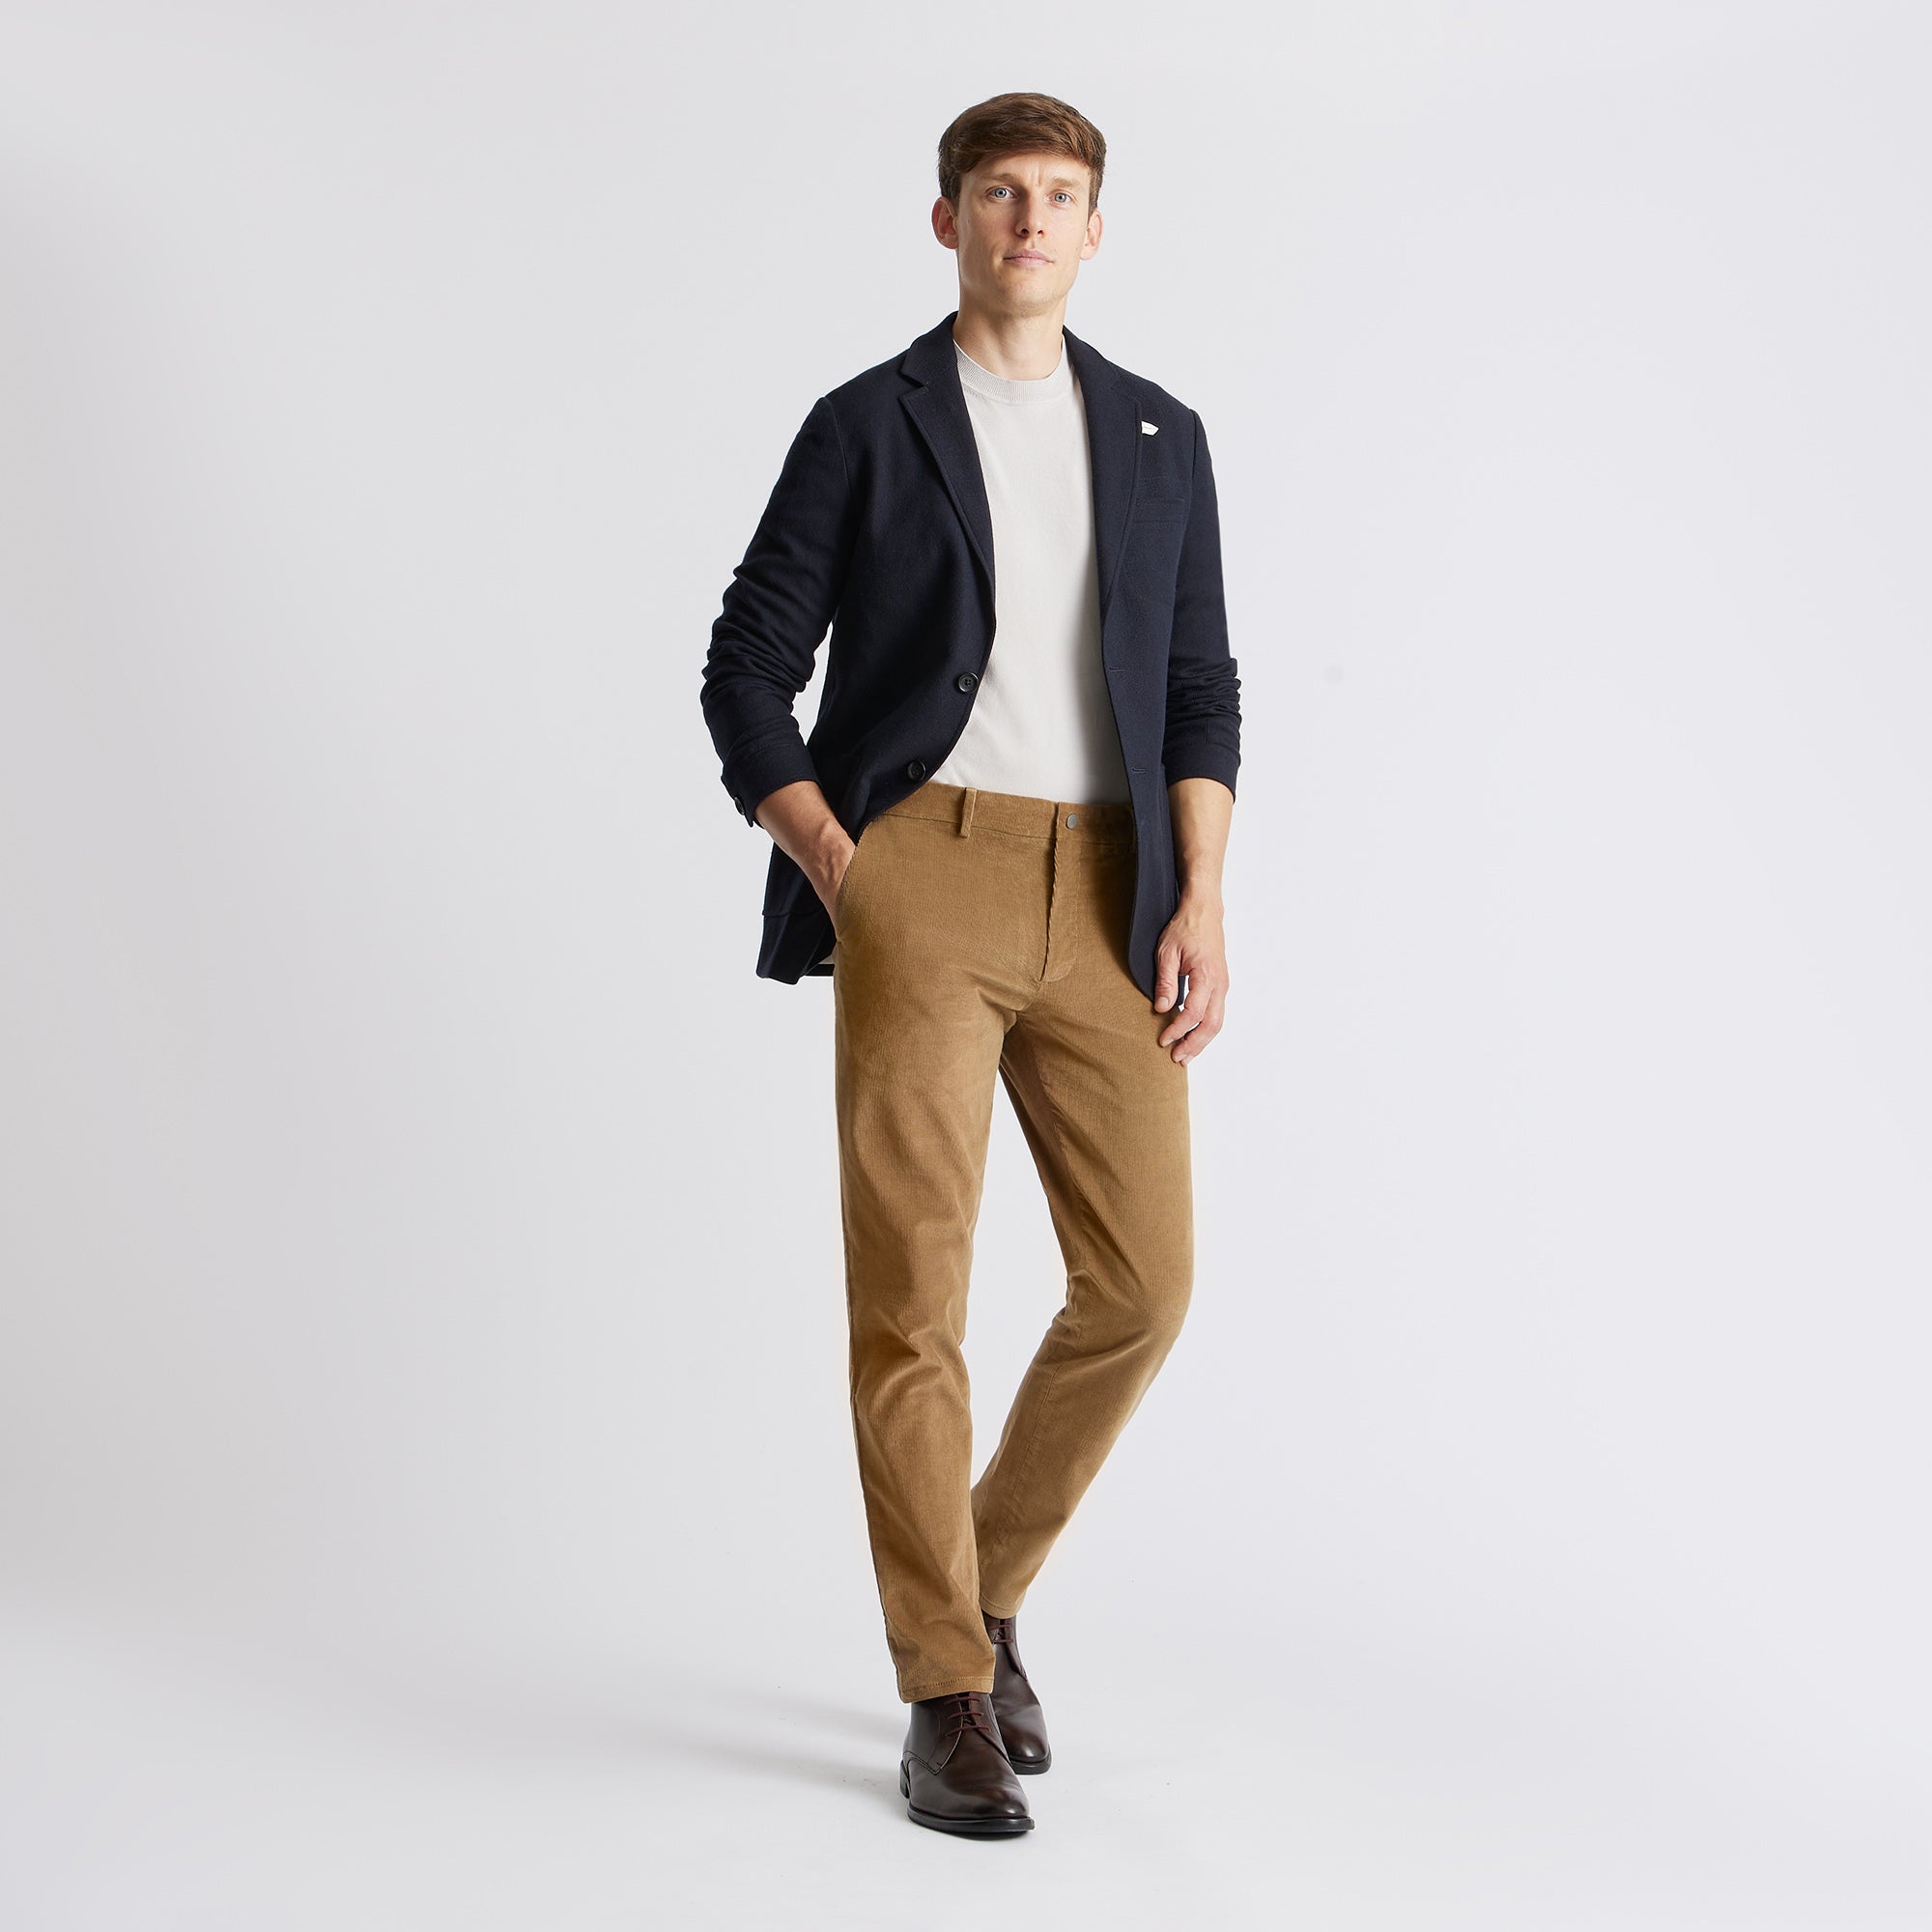 Thanksgiving Outfits for Men: A Guide for Style & Comfort